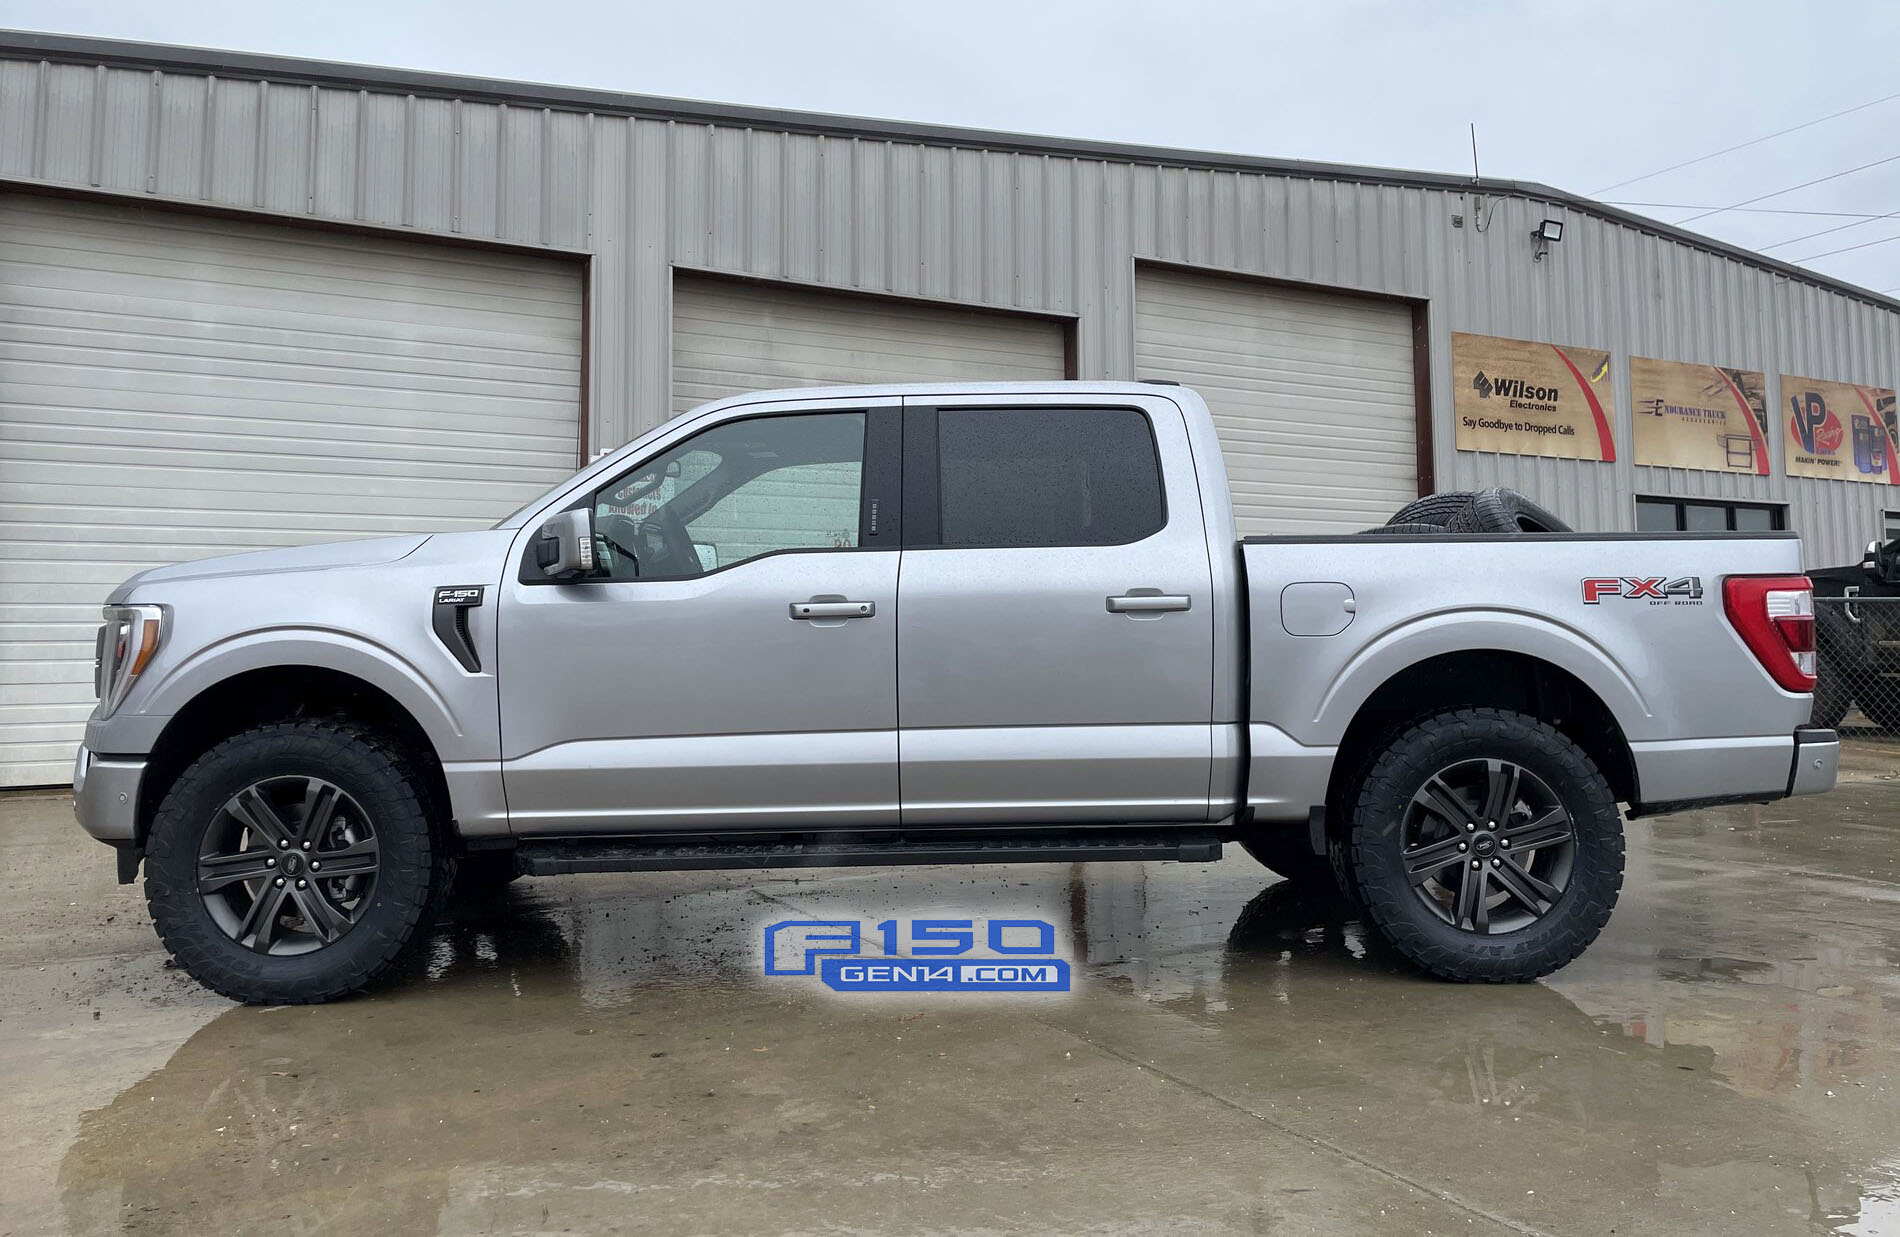 2.25” ReadyLIFT Leveling Kit with 35's installed on my 2021 F150